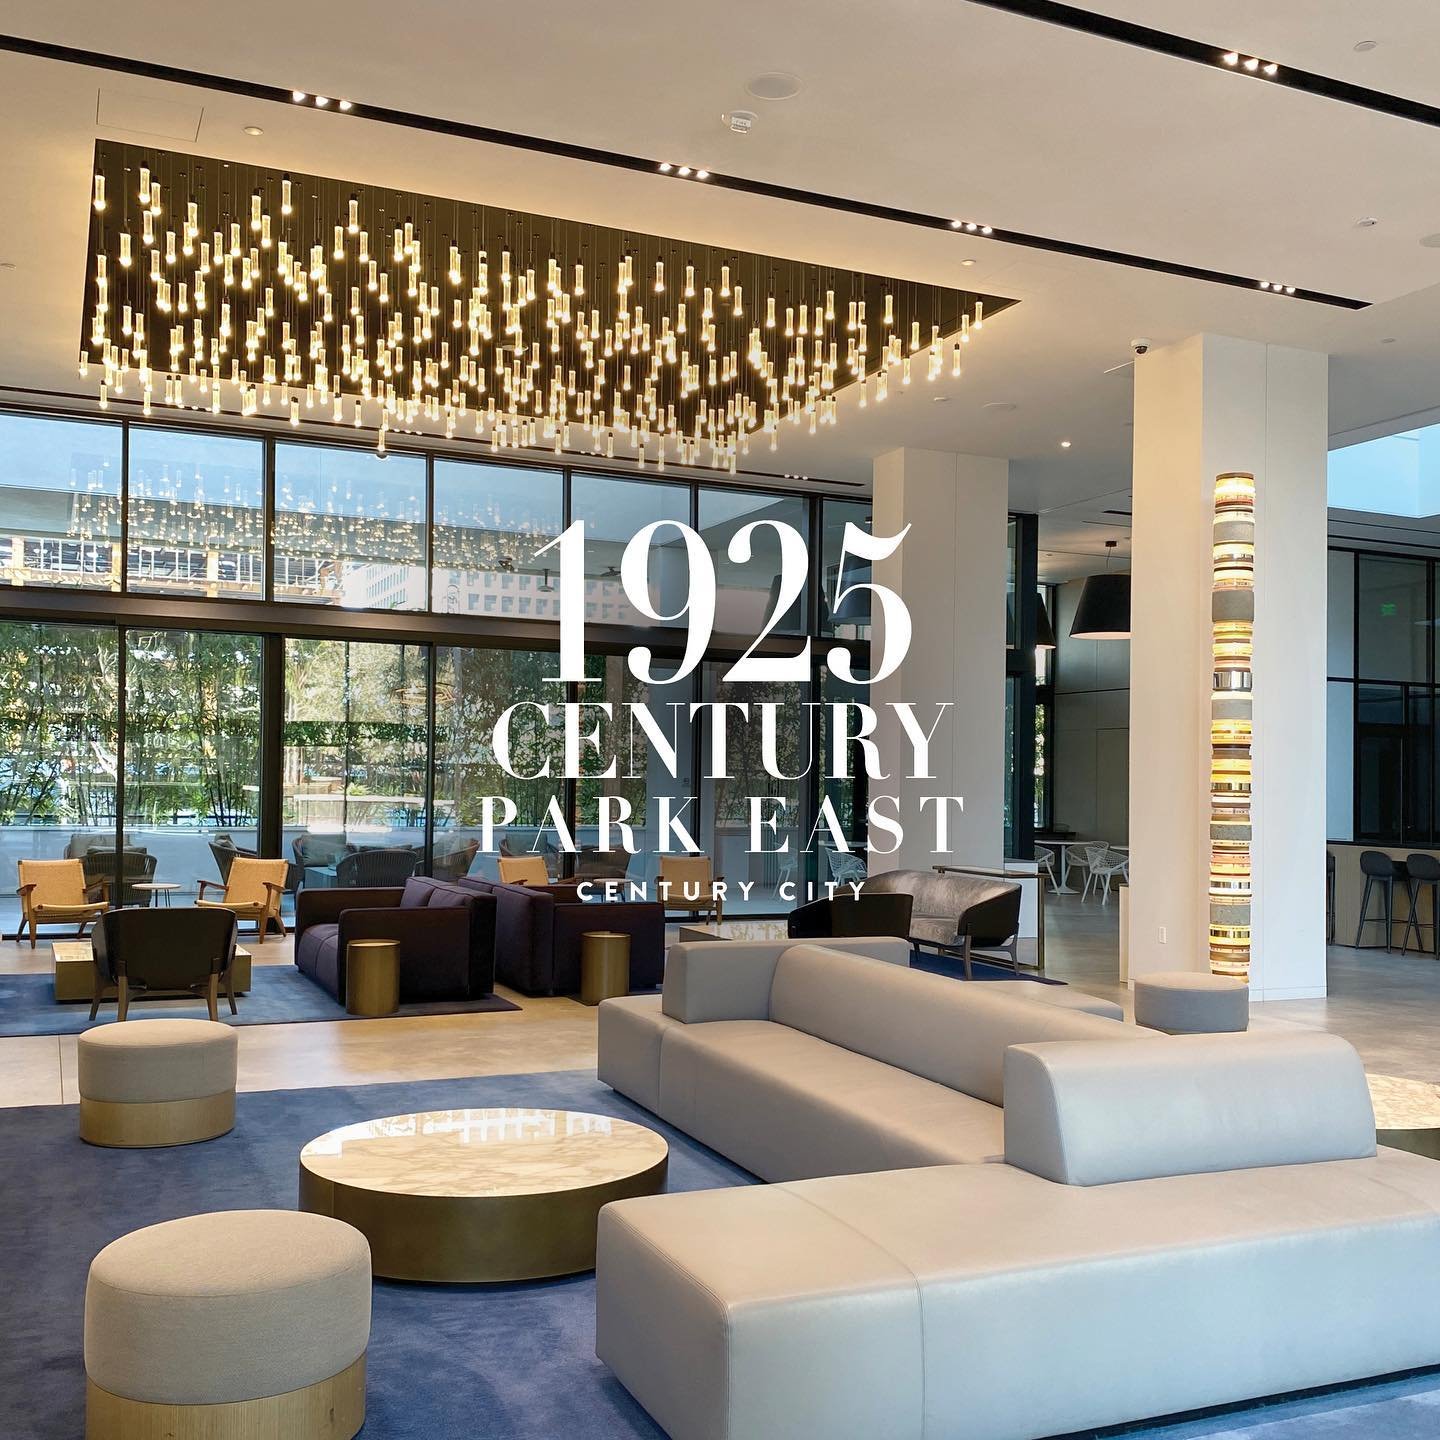 SHARED SUBLEASE: 650 SF prime office space within entertainment law firm // 1925 Century Park East, Suite 2050 

- Central Century City location
- Accessibility to conference room, kitchen, printing station and formal reception
- Open views of Centur